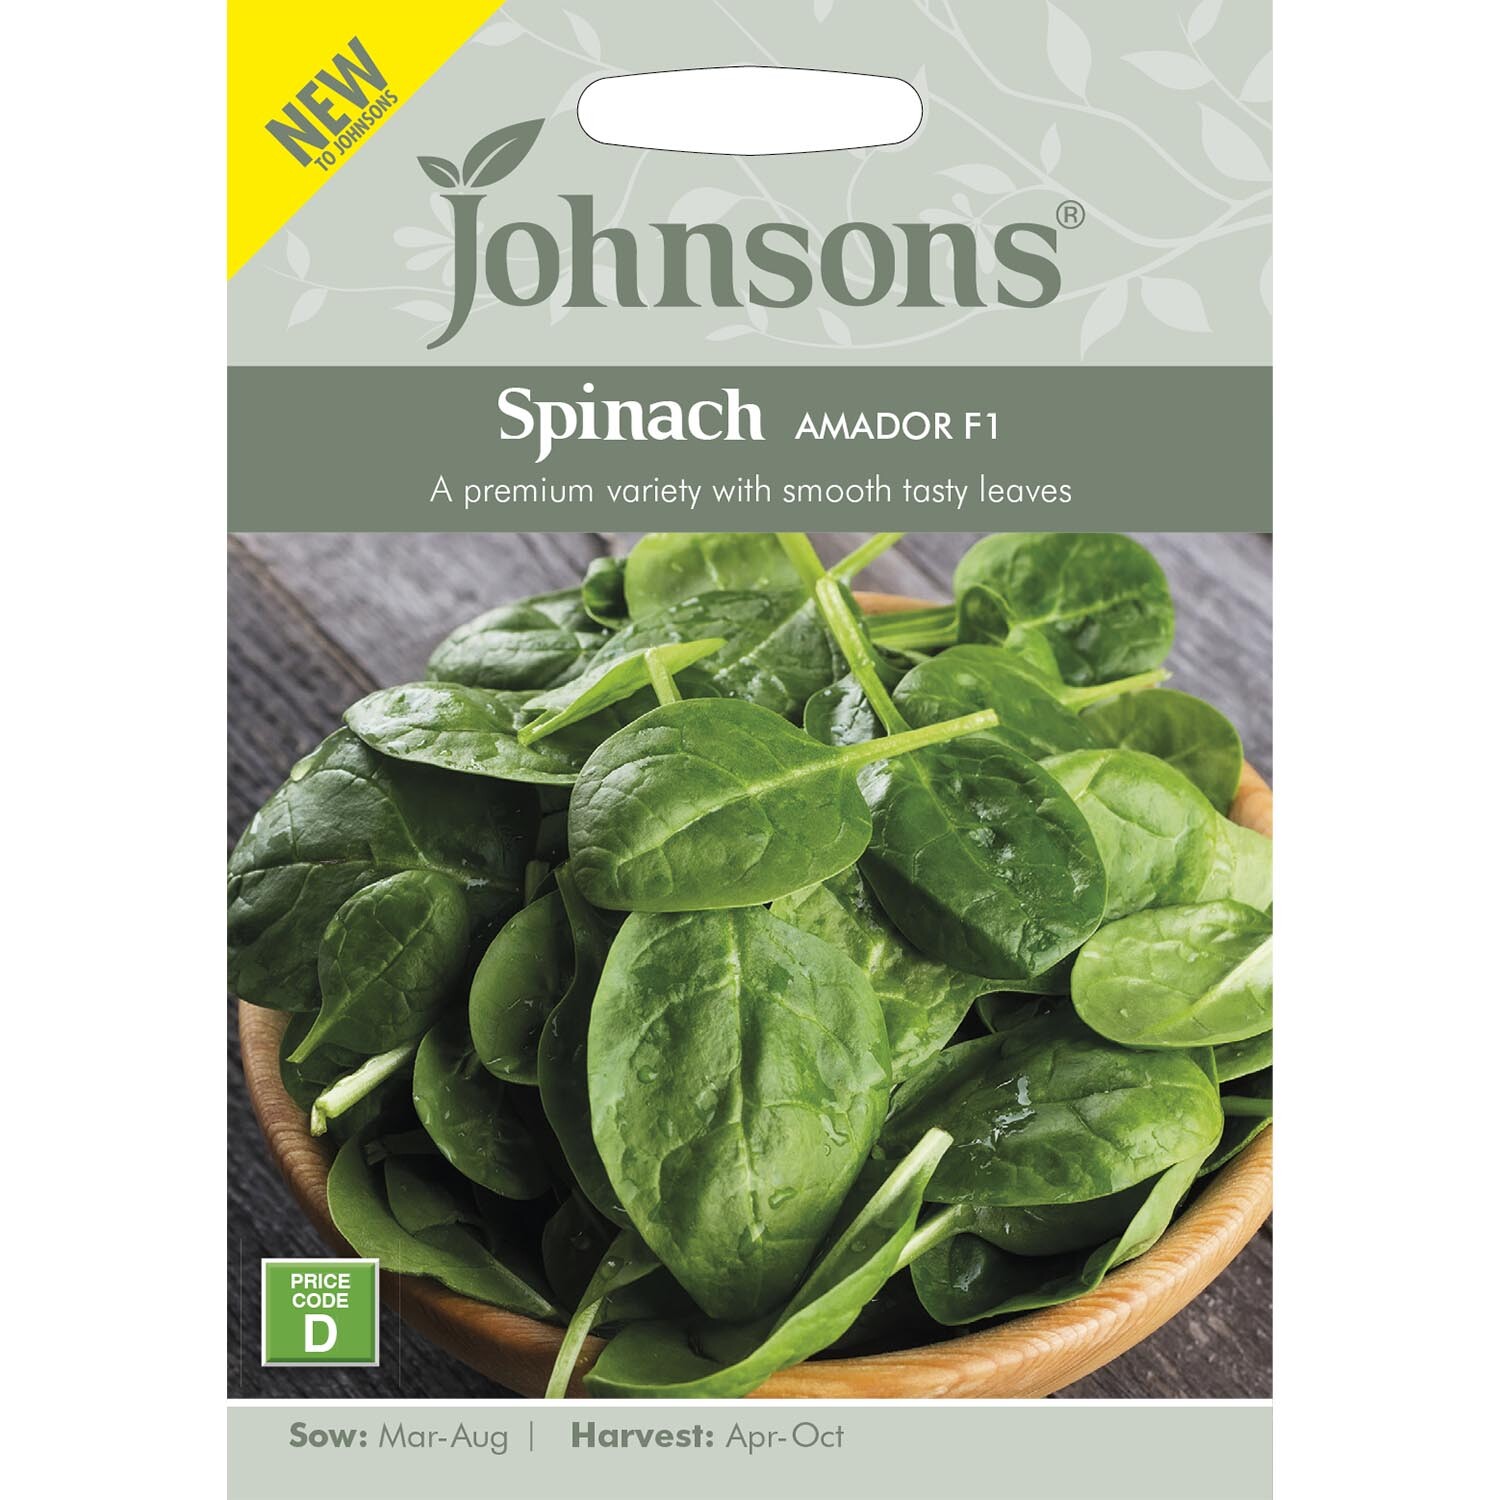 Johnsons Spinach Amador F1 Vegetable Seeds Image 2